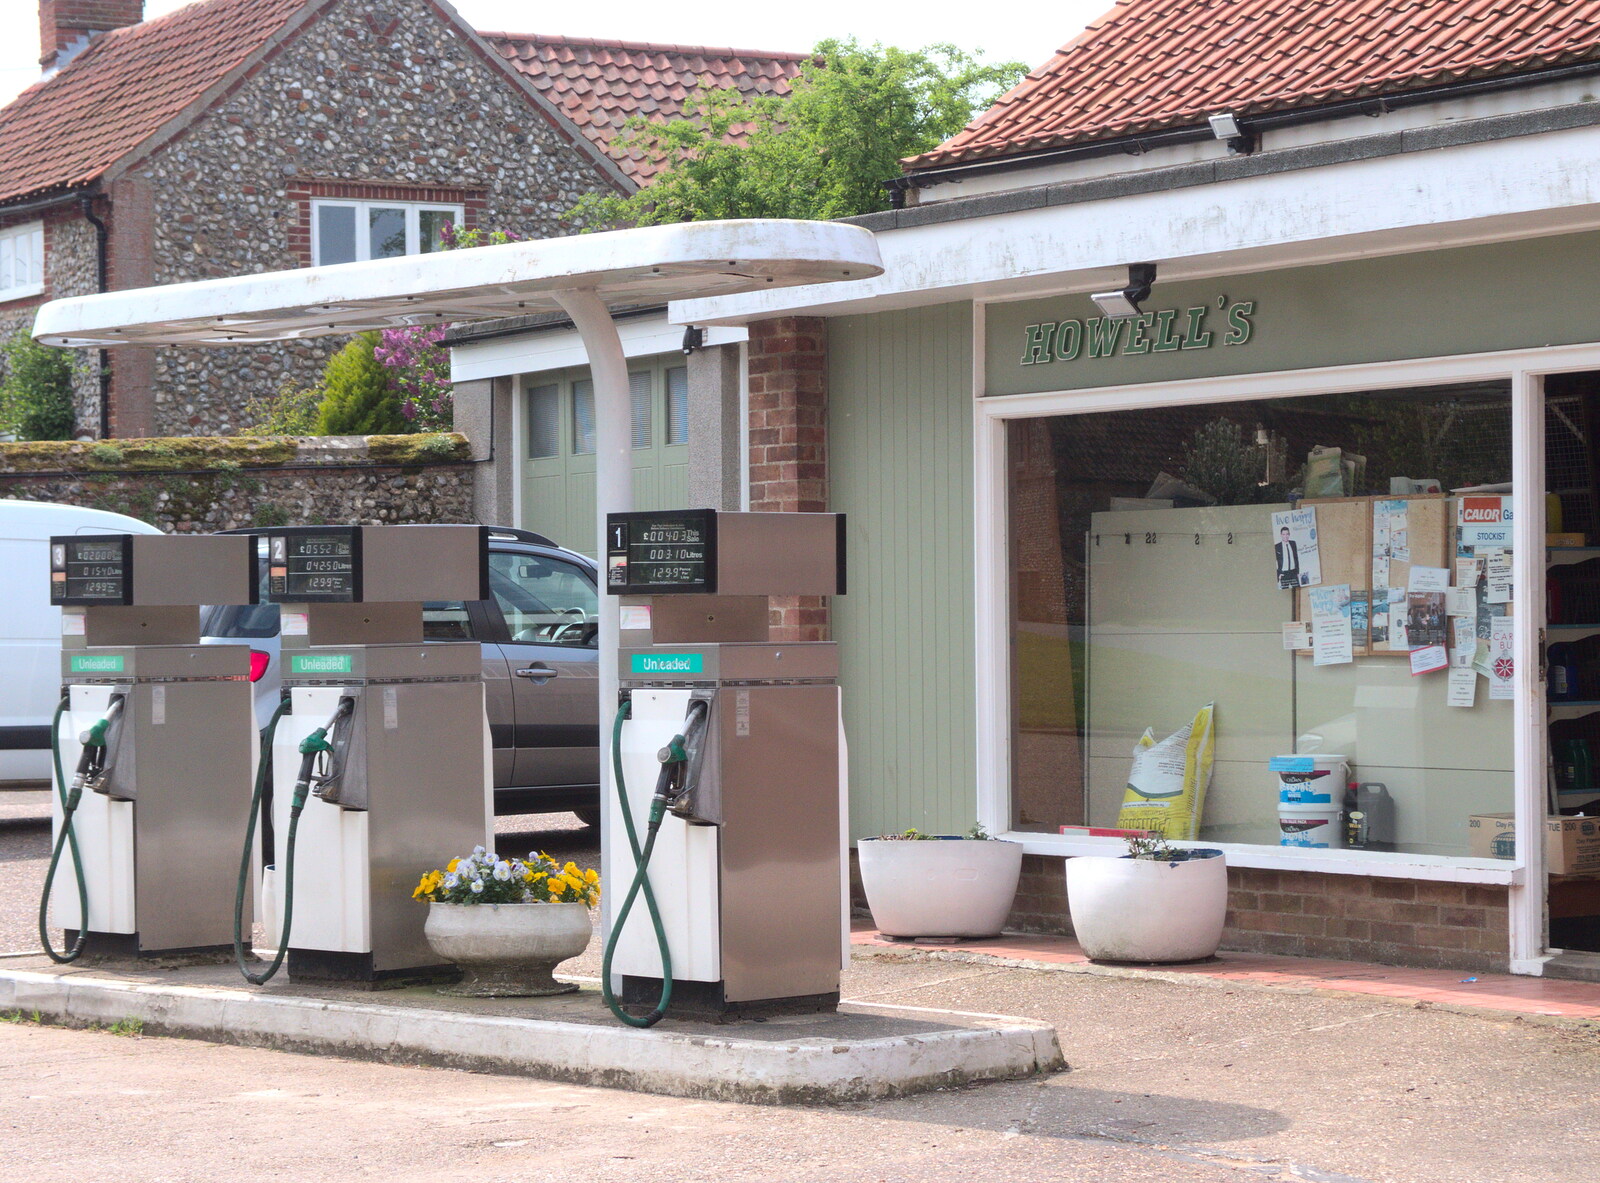 Howell's - a great old-school petrol station from The BSCC Weekend Away, Holt, Norfolk - 12th May 2018